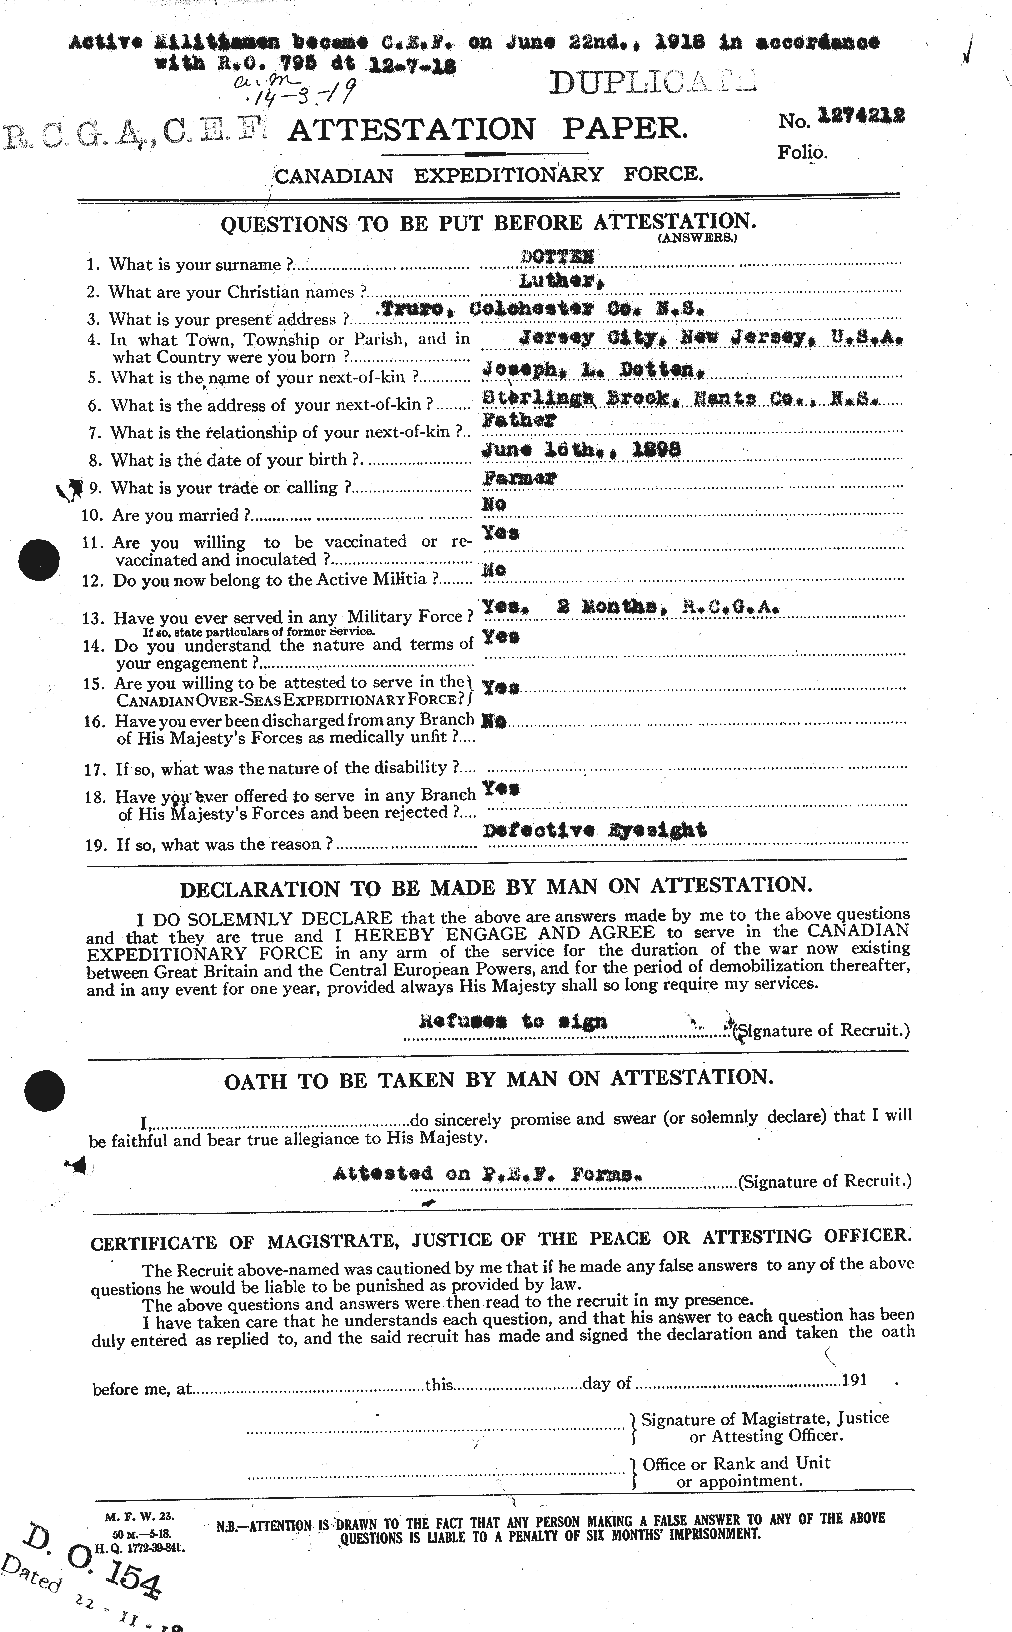 Personnel Records of the First World War - CEF 299669a